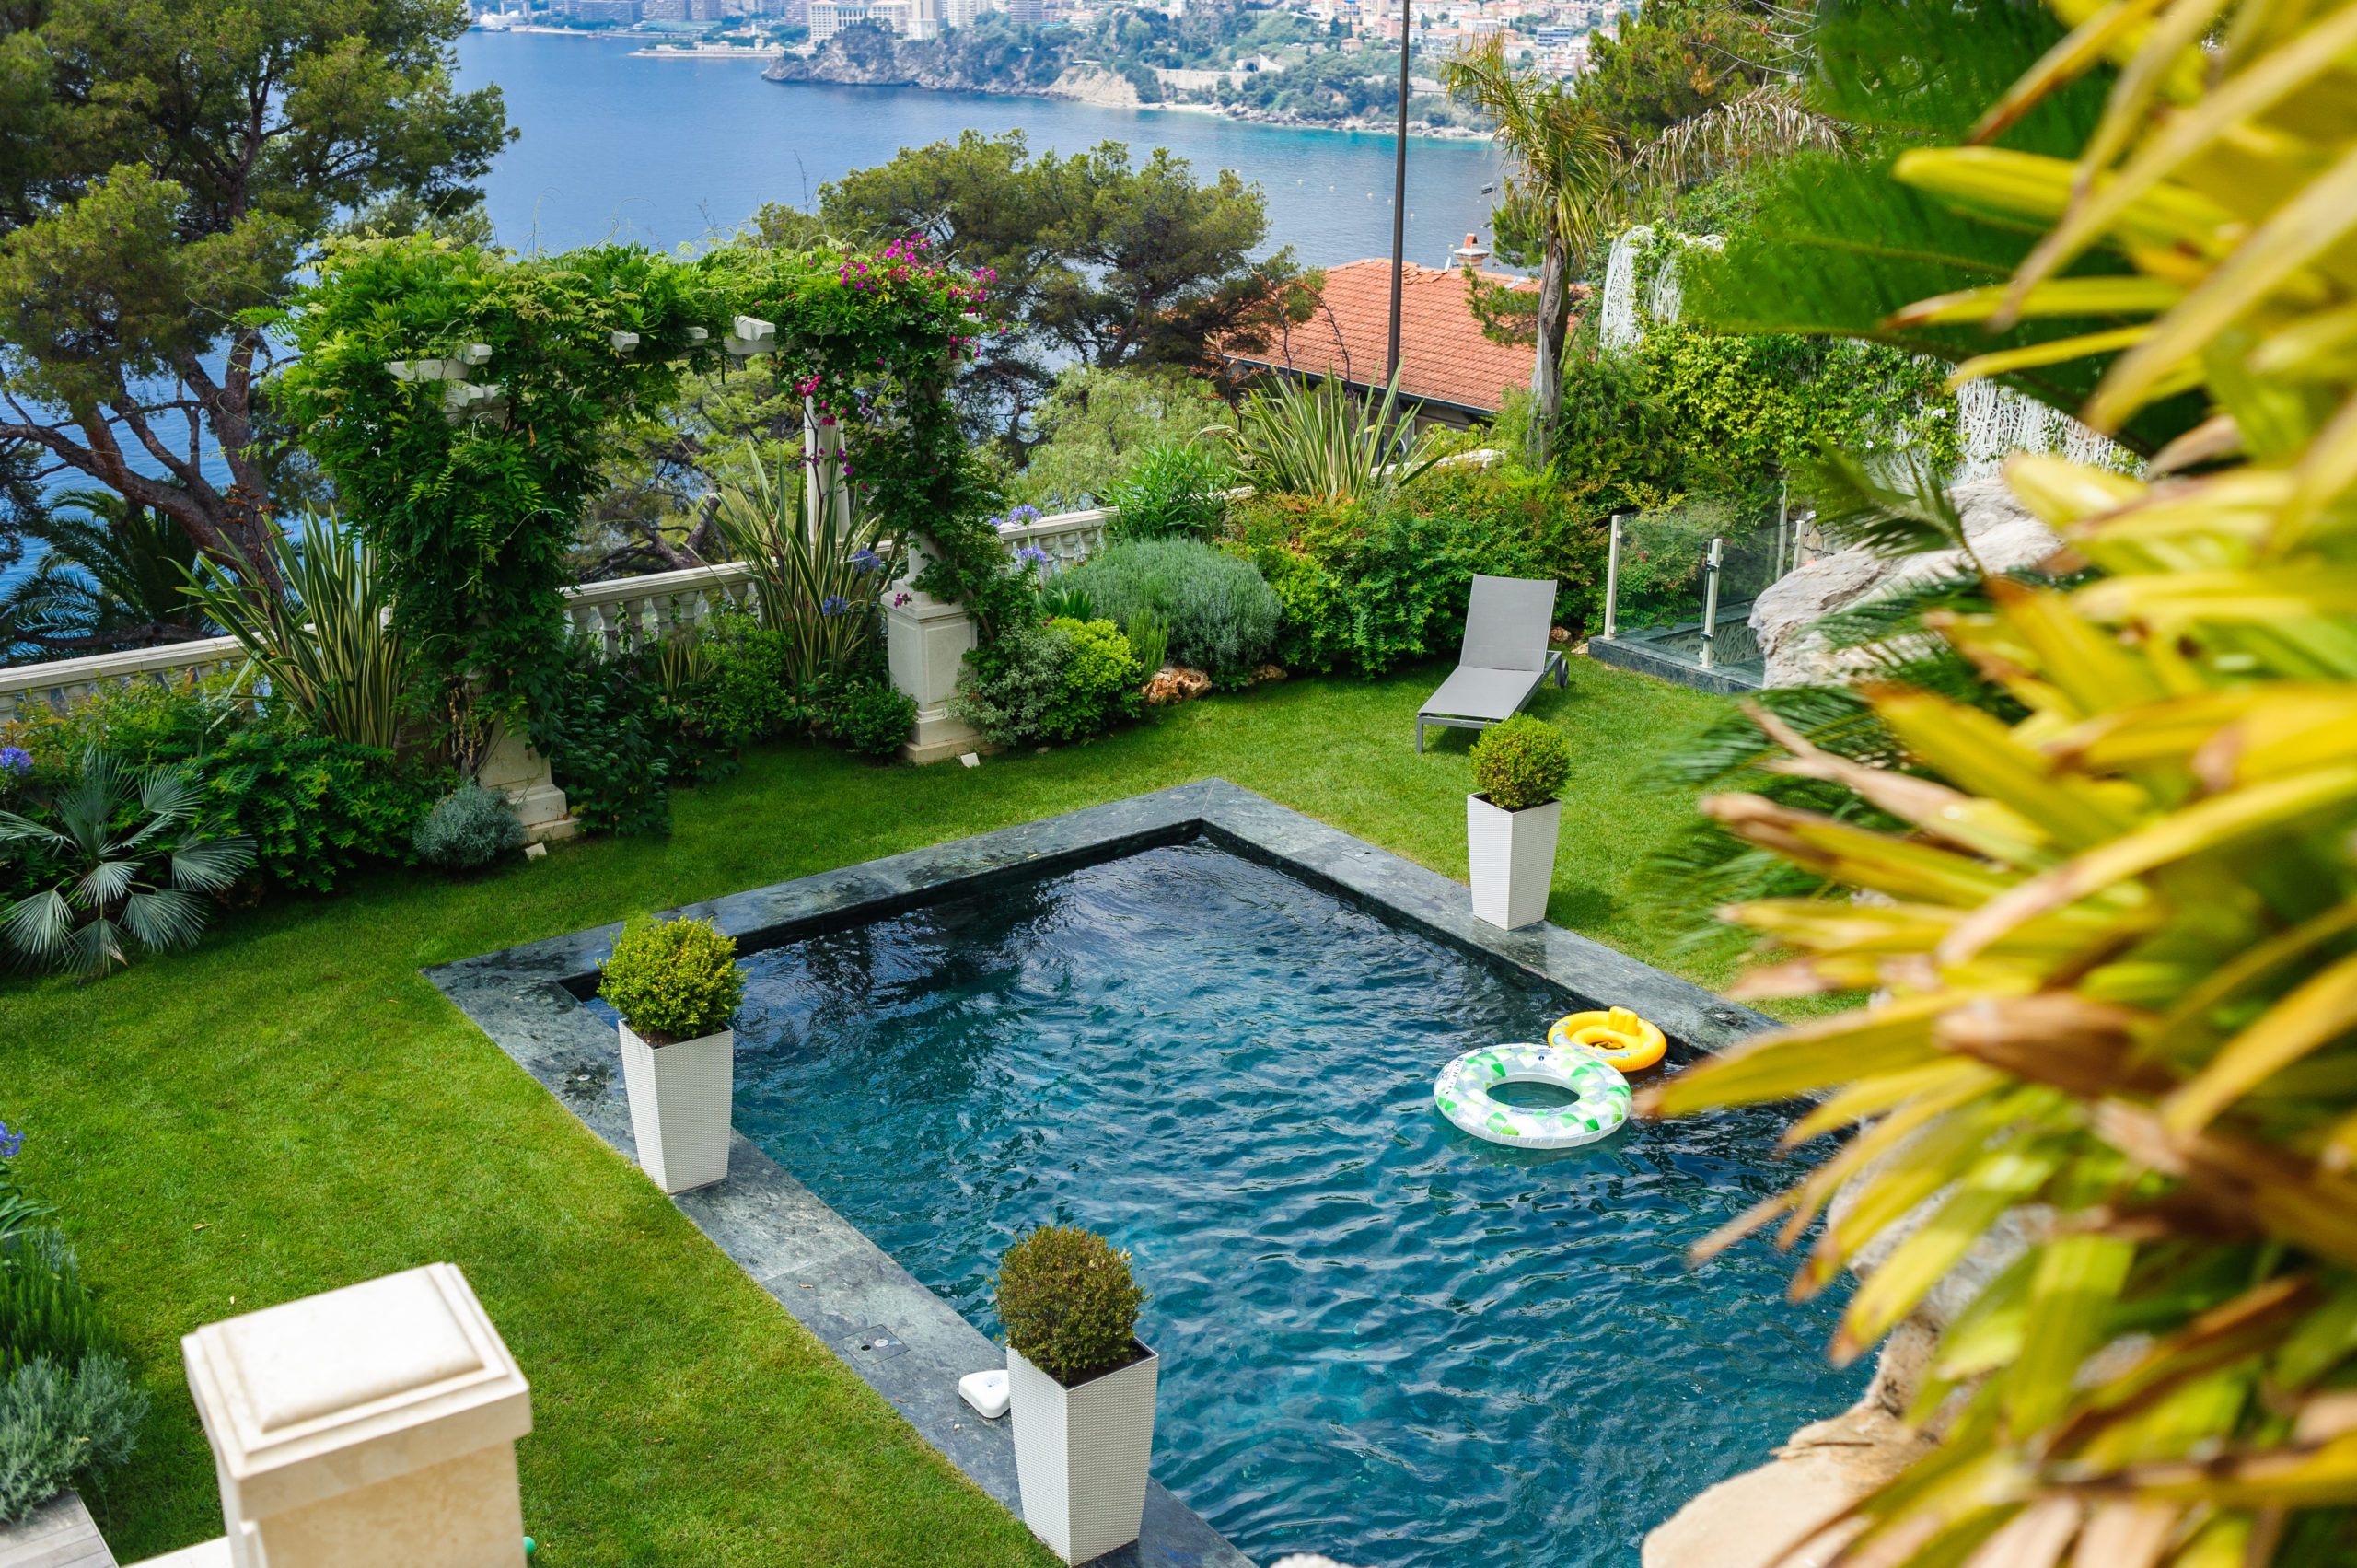 A pool with a lifebuoy floating in the water, surrounded by an abundance of lush plants and greenery, providing both safety and a natural, inviting ambiance.